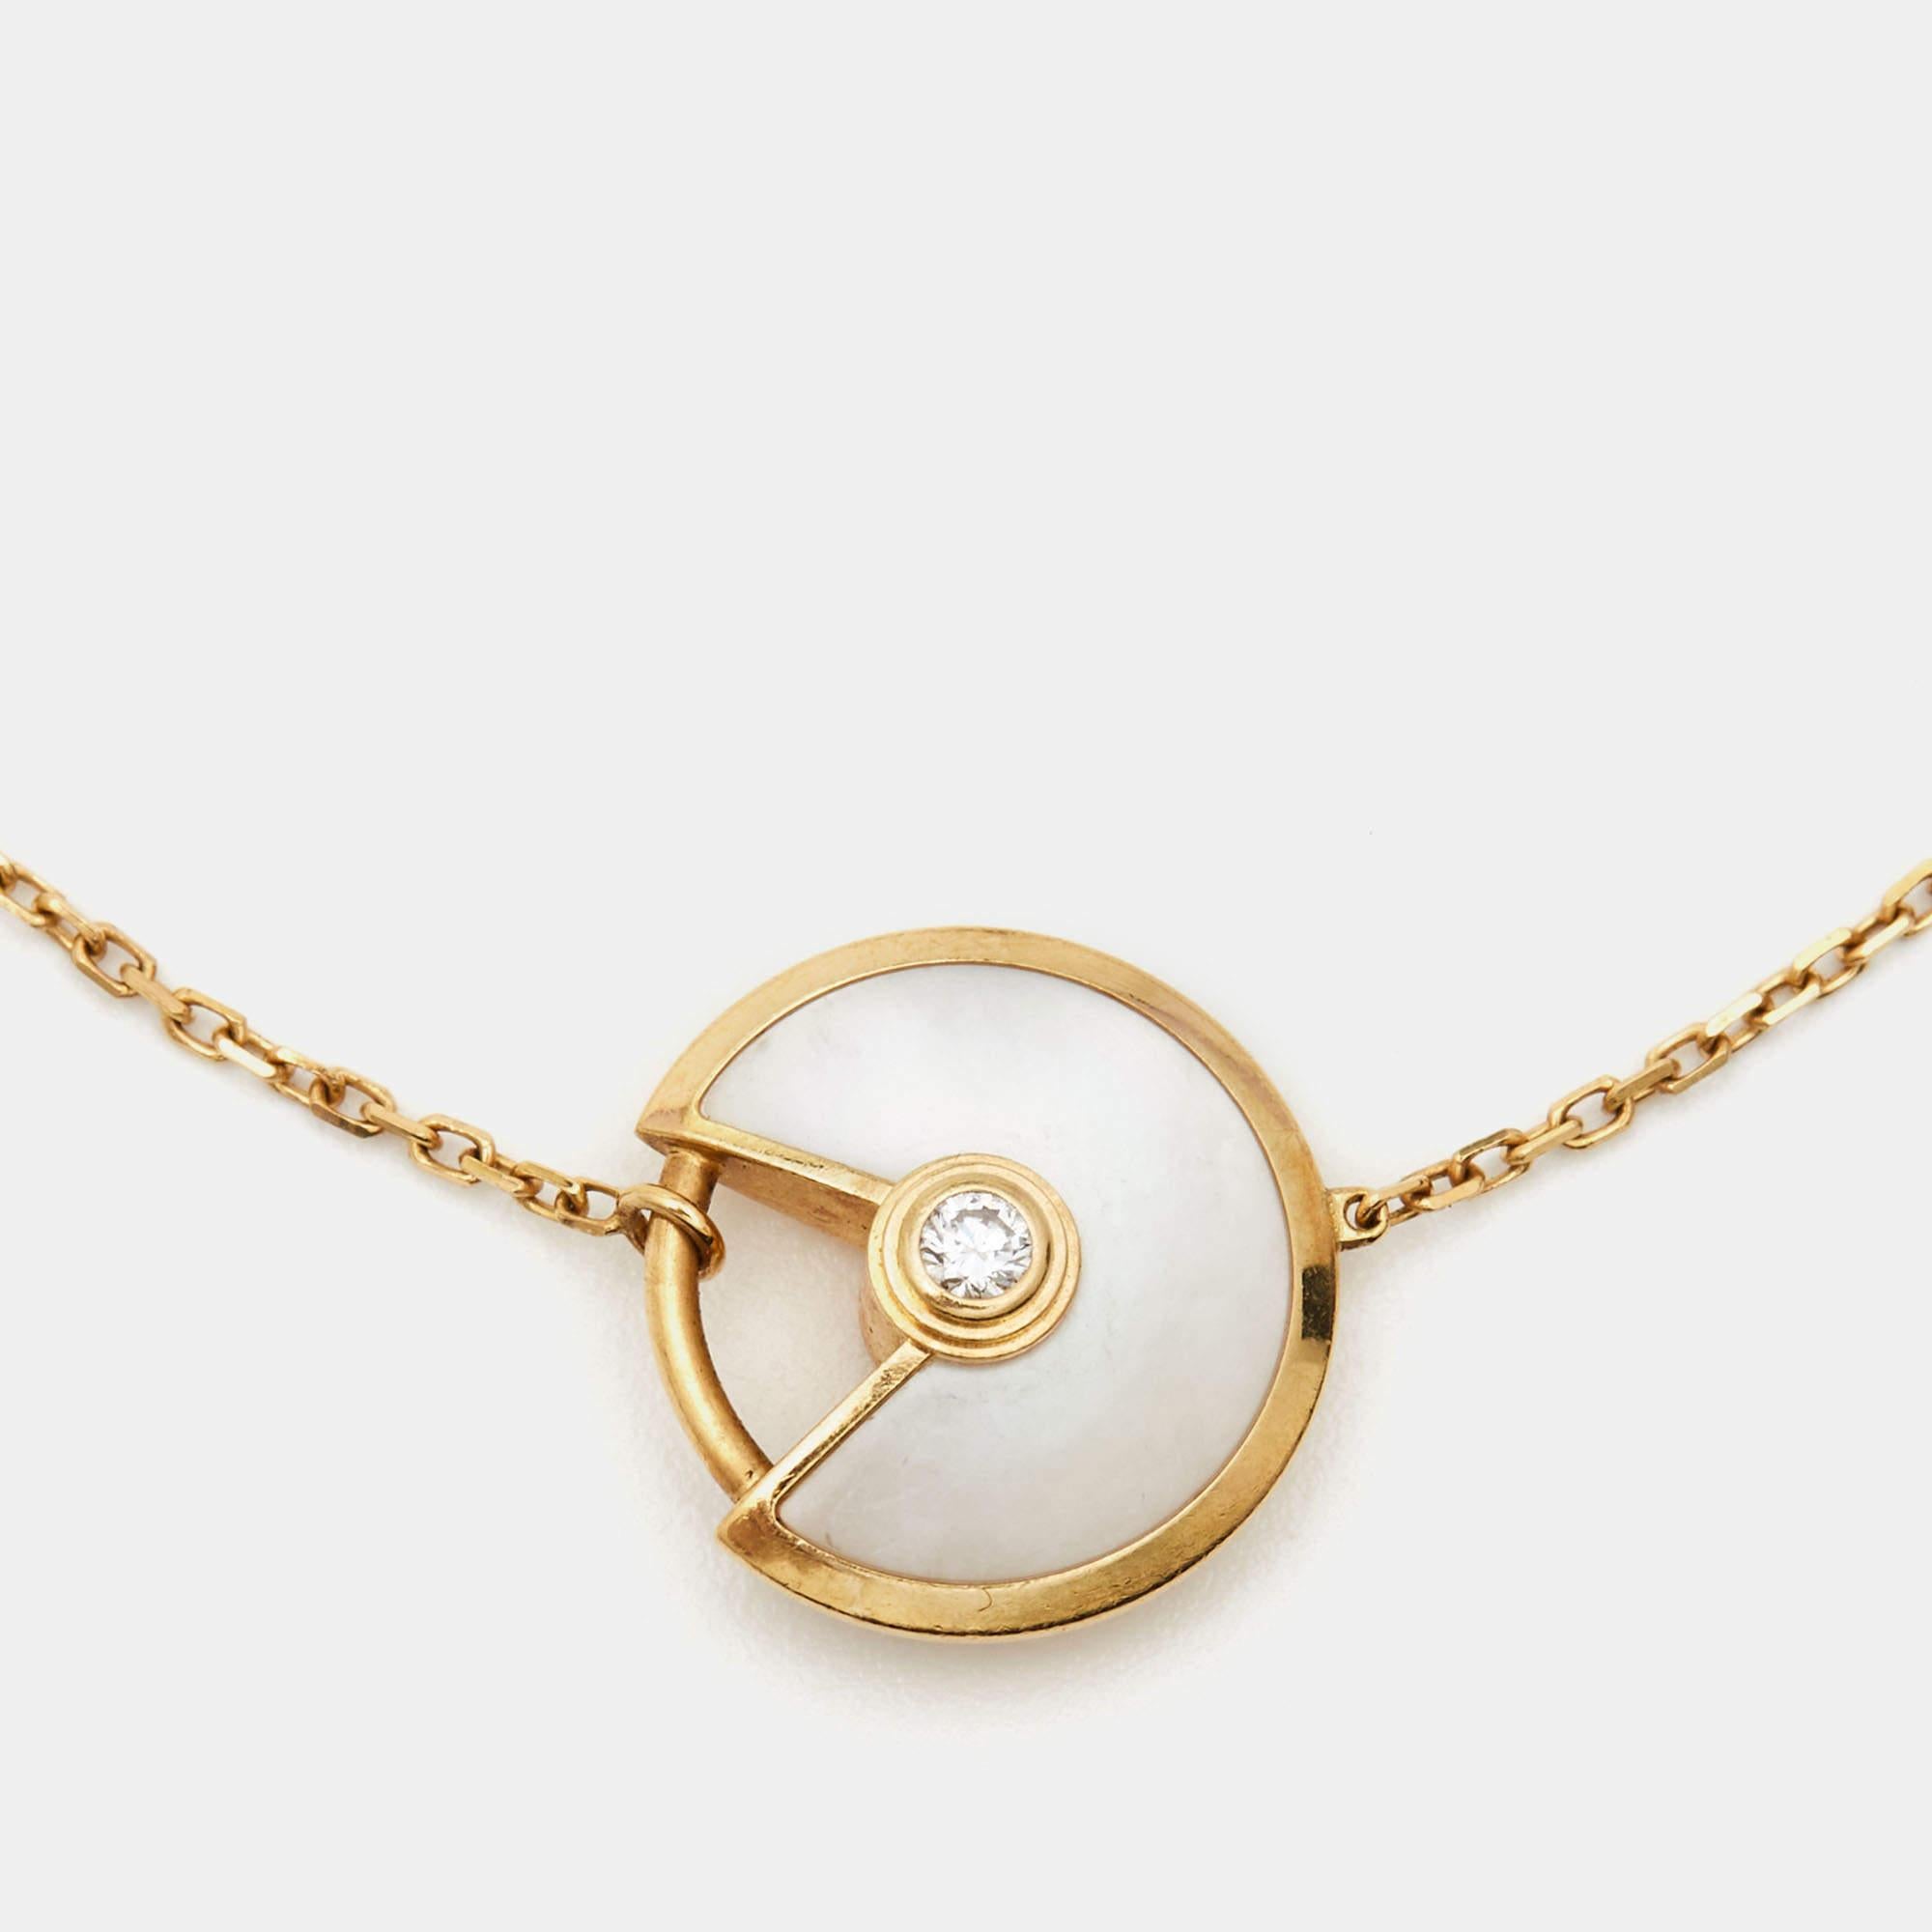 A magnificent offering from Cartier's Amulette de Cartier line. The bracelet comes sculpted from 18k yellow gold, and it has the signature motif in mother of pearl highlighted by a shimmering diamond. Smoothly finished, the desirable creation